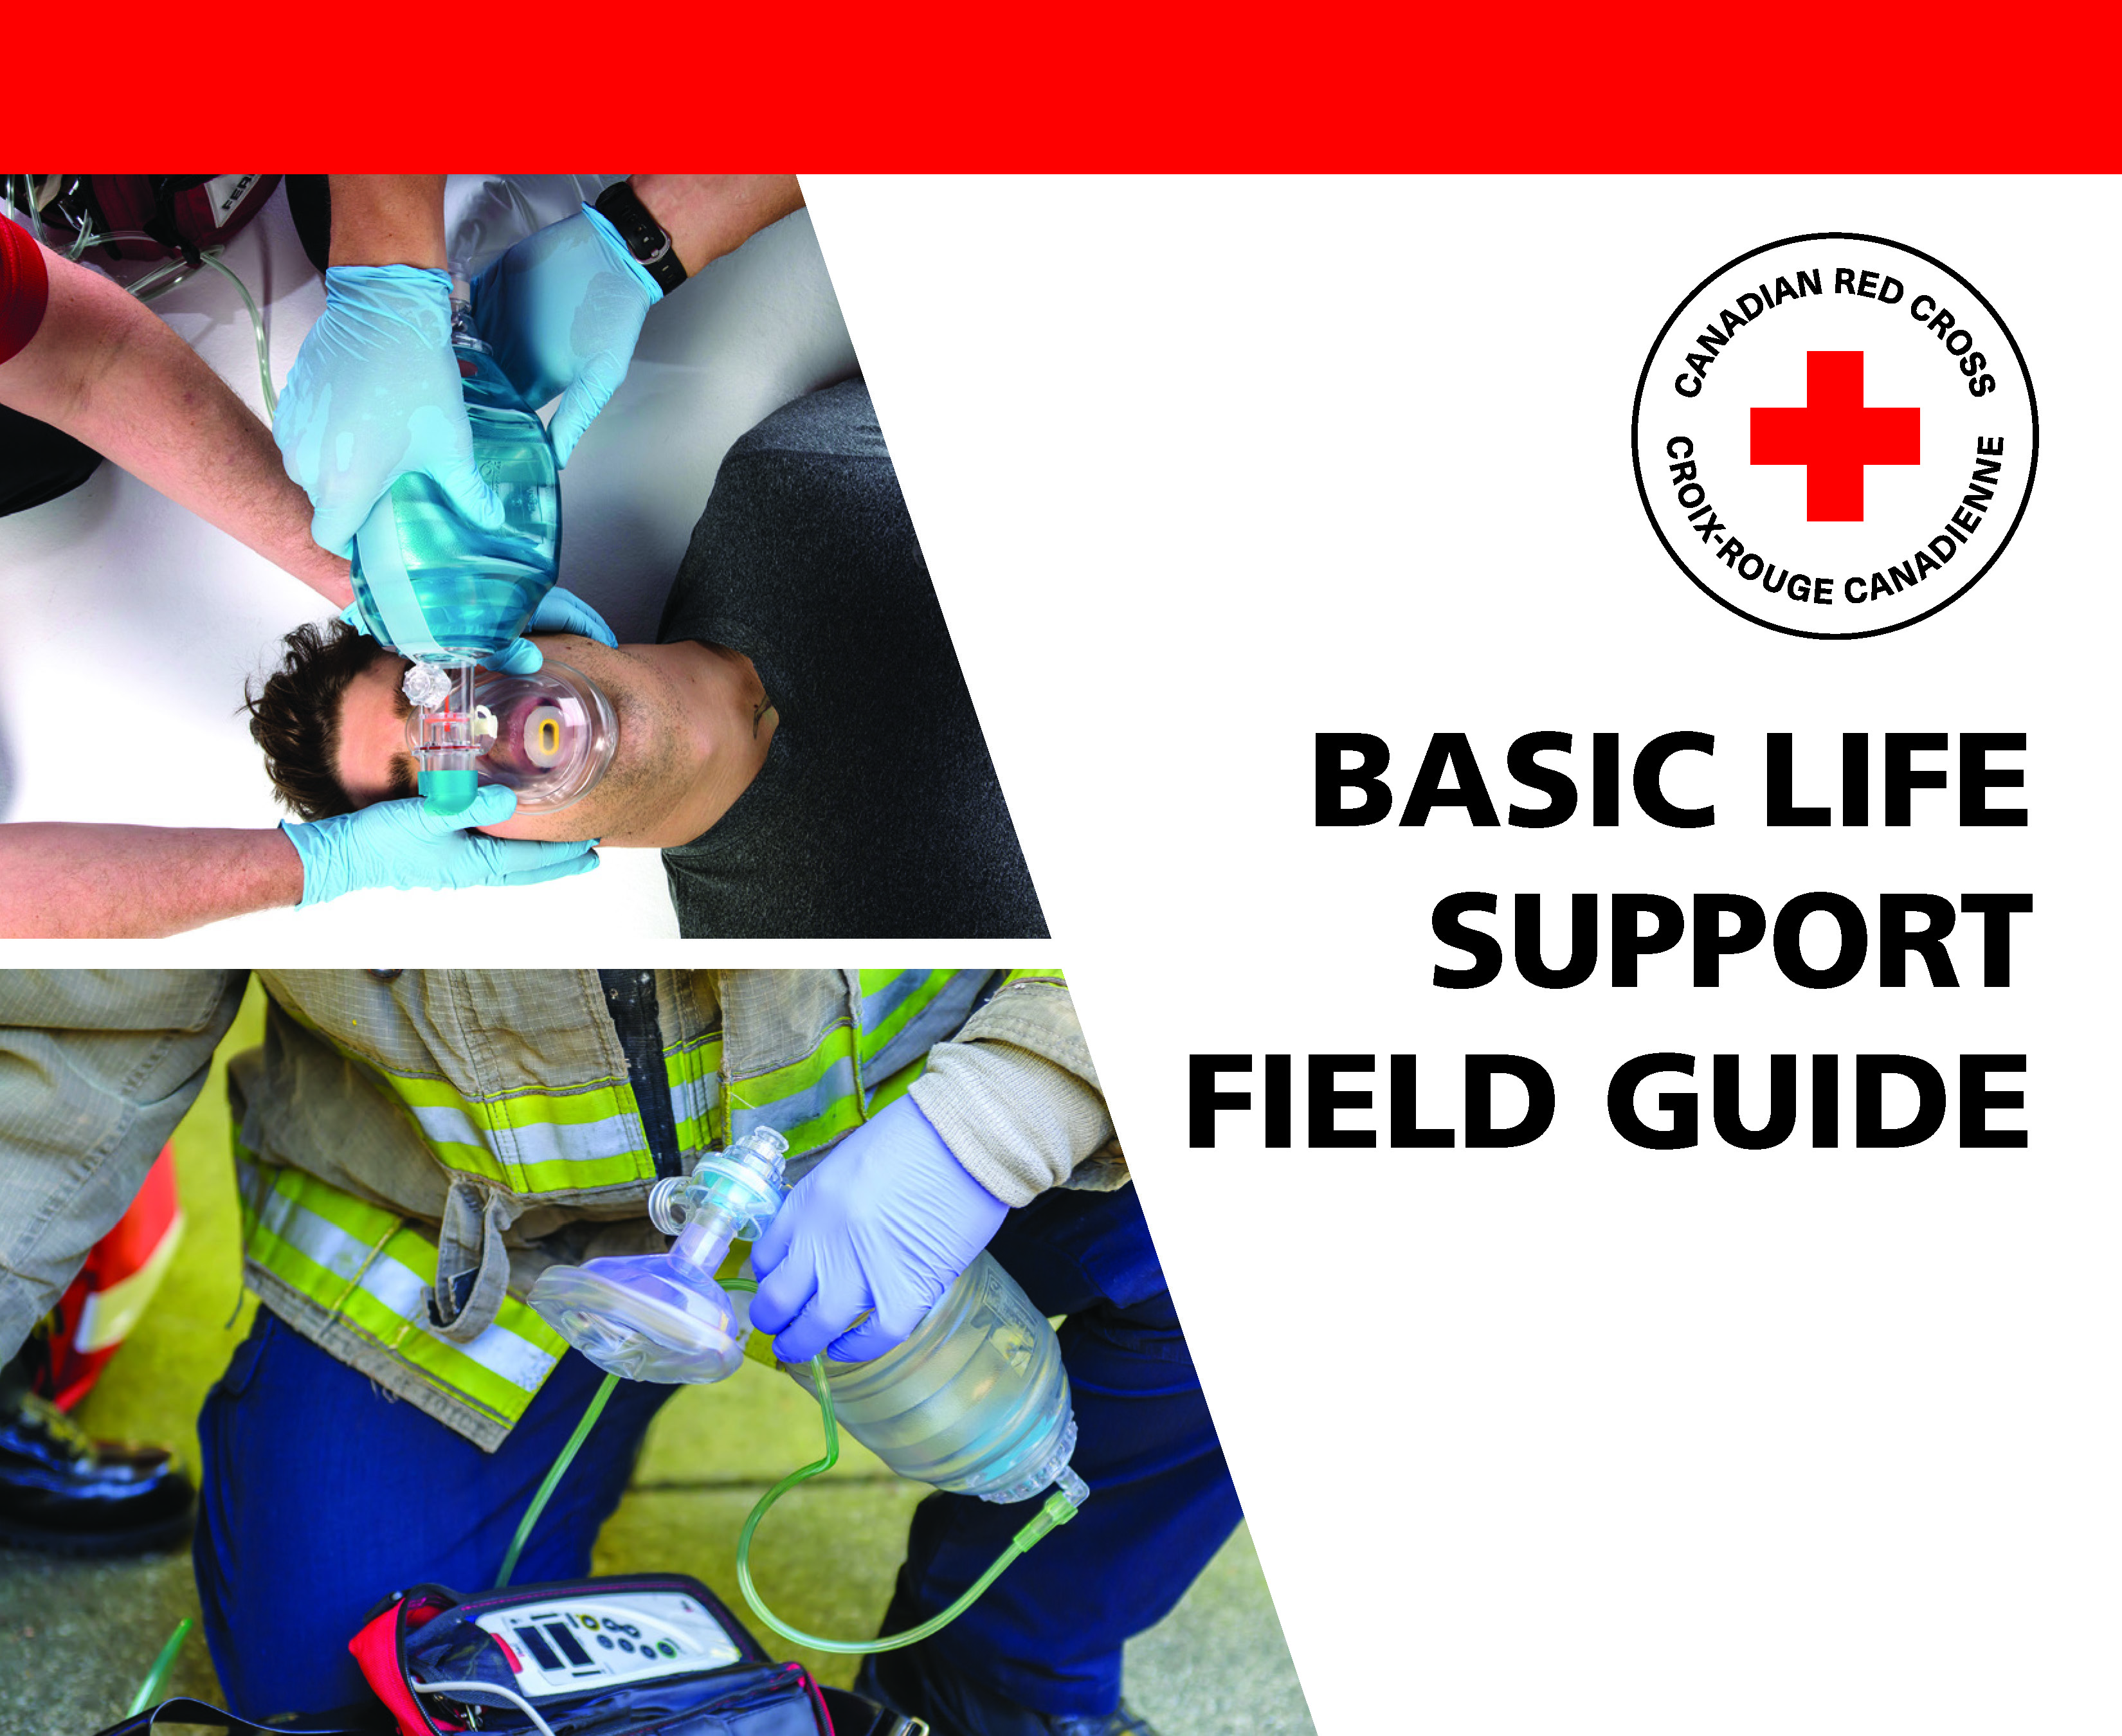 First Aid Course Materials for Basic Life Support in Victoria